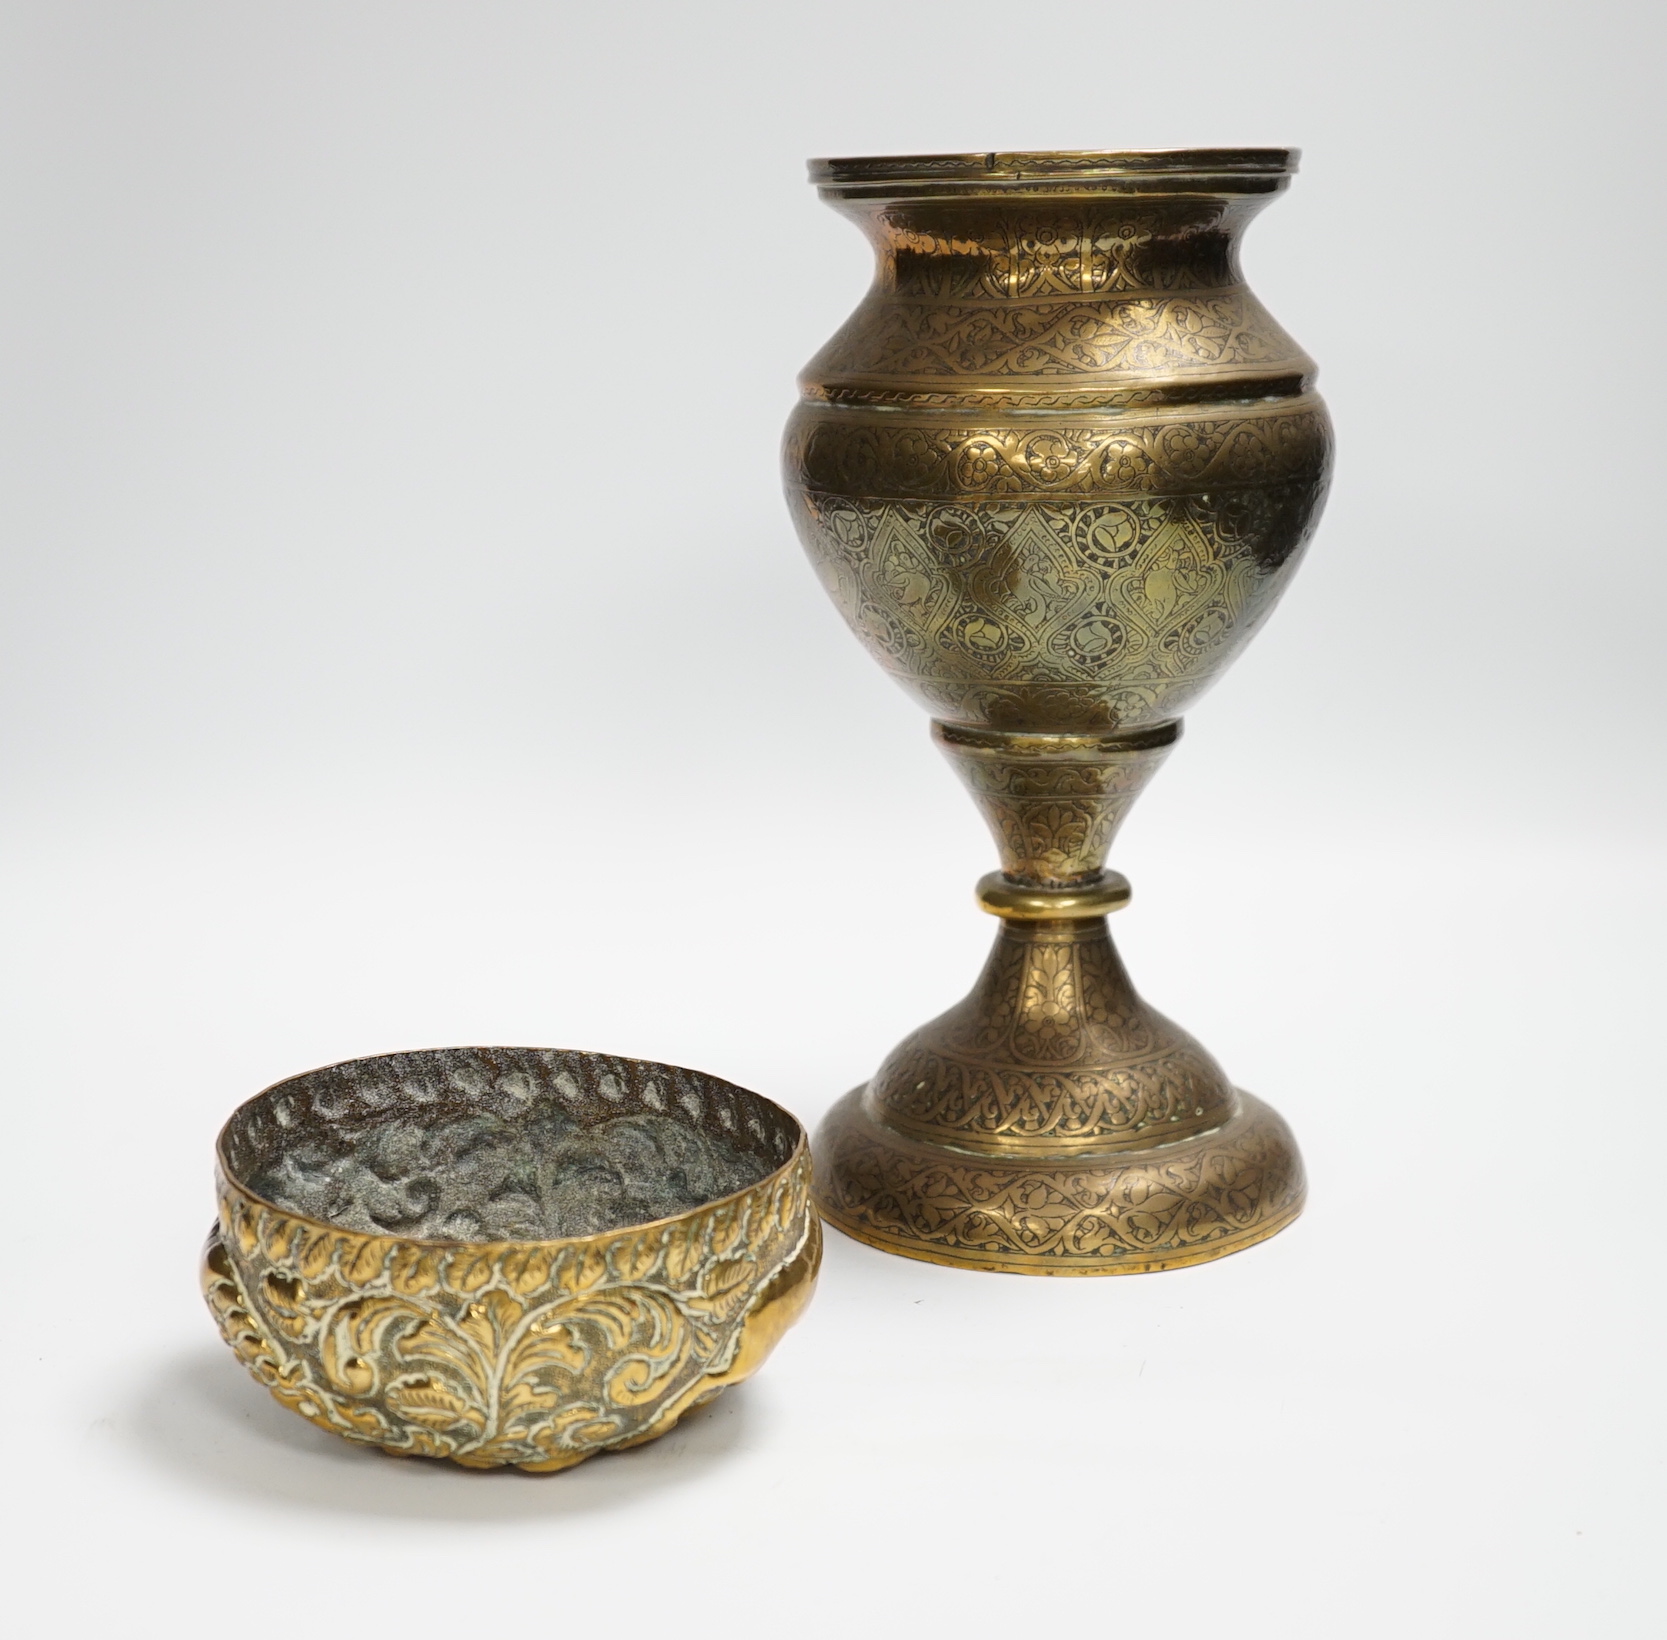 A Persian Qajar engraved brass vase and an Indian repousse brass bowl, largest 25cm high